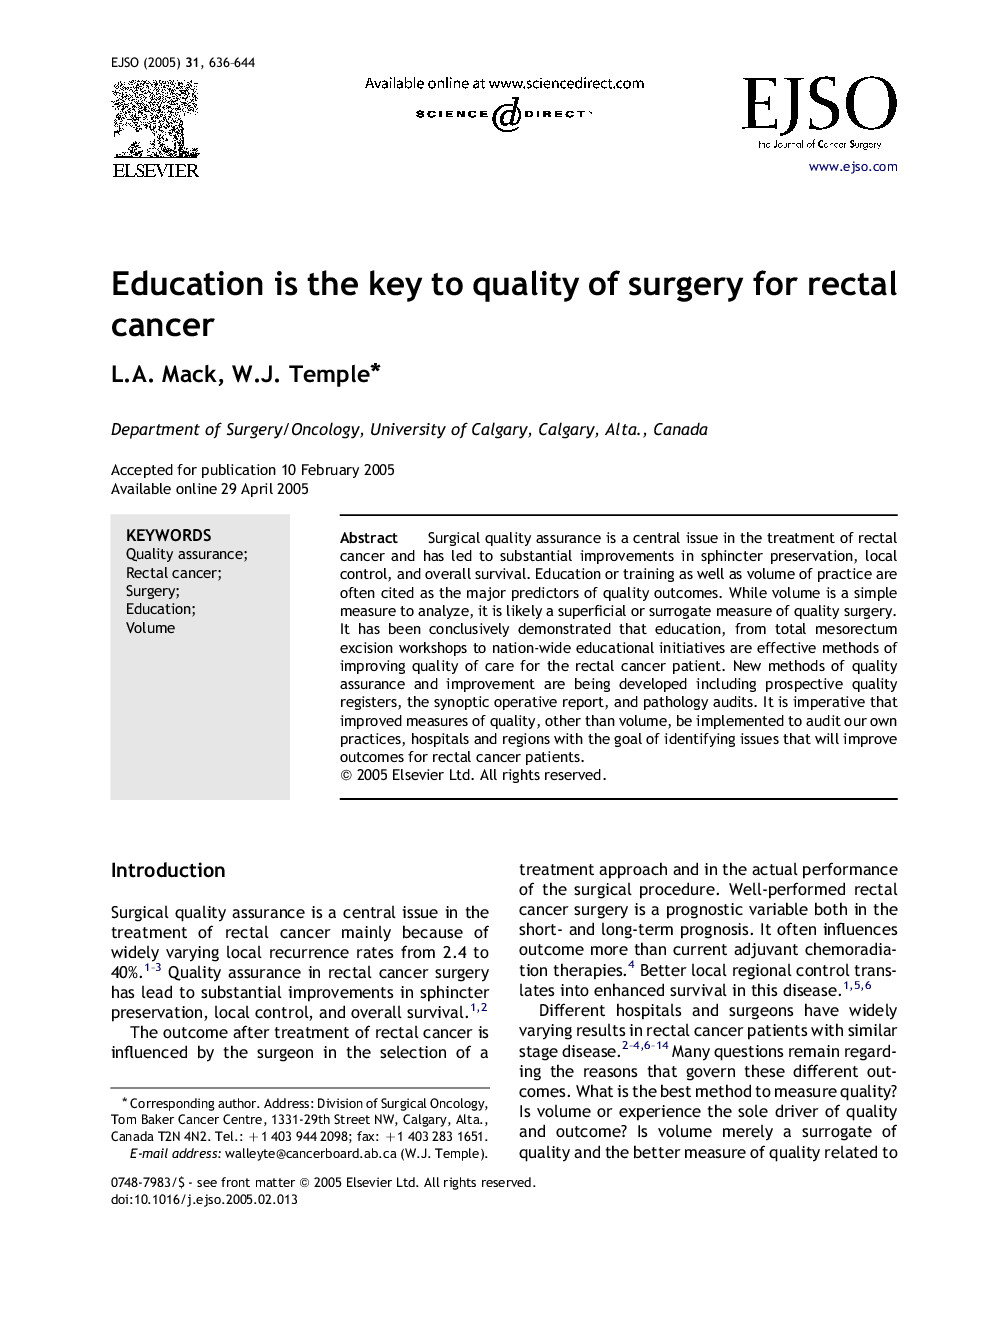 Education is the key to quality of surgery for rectal cancer